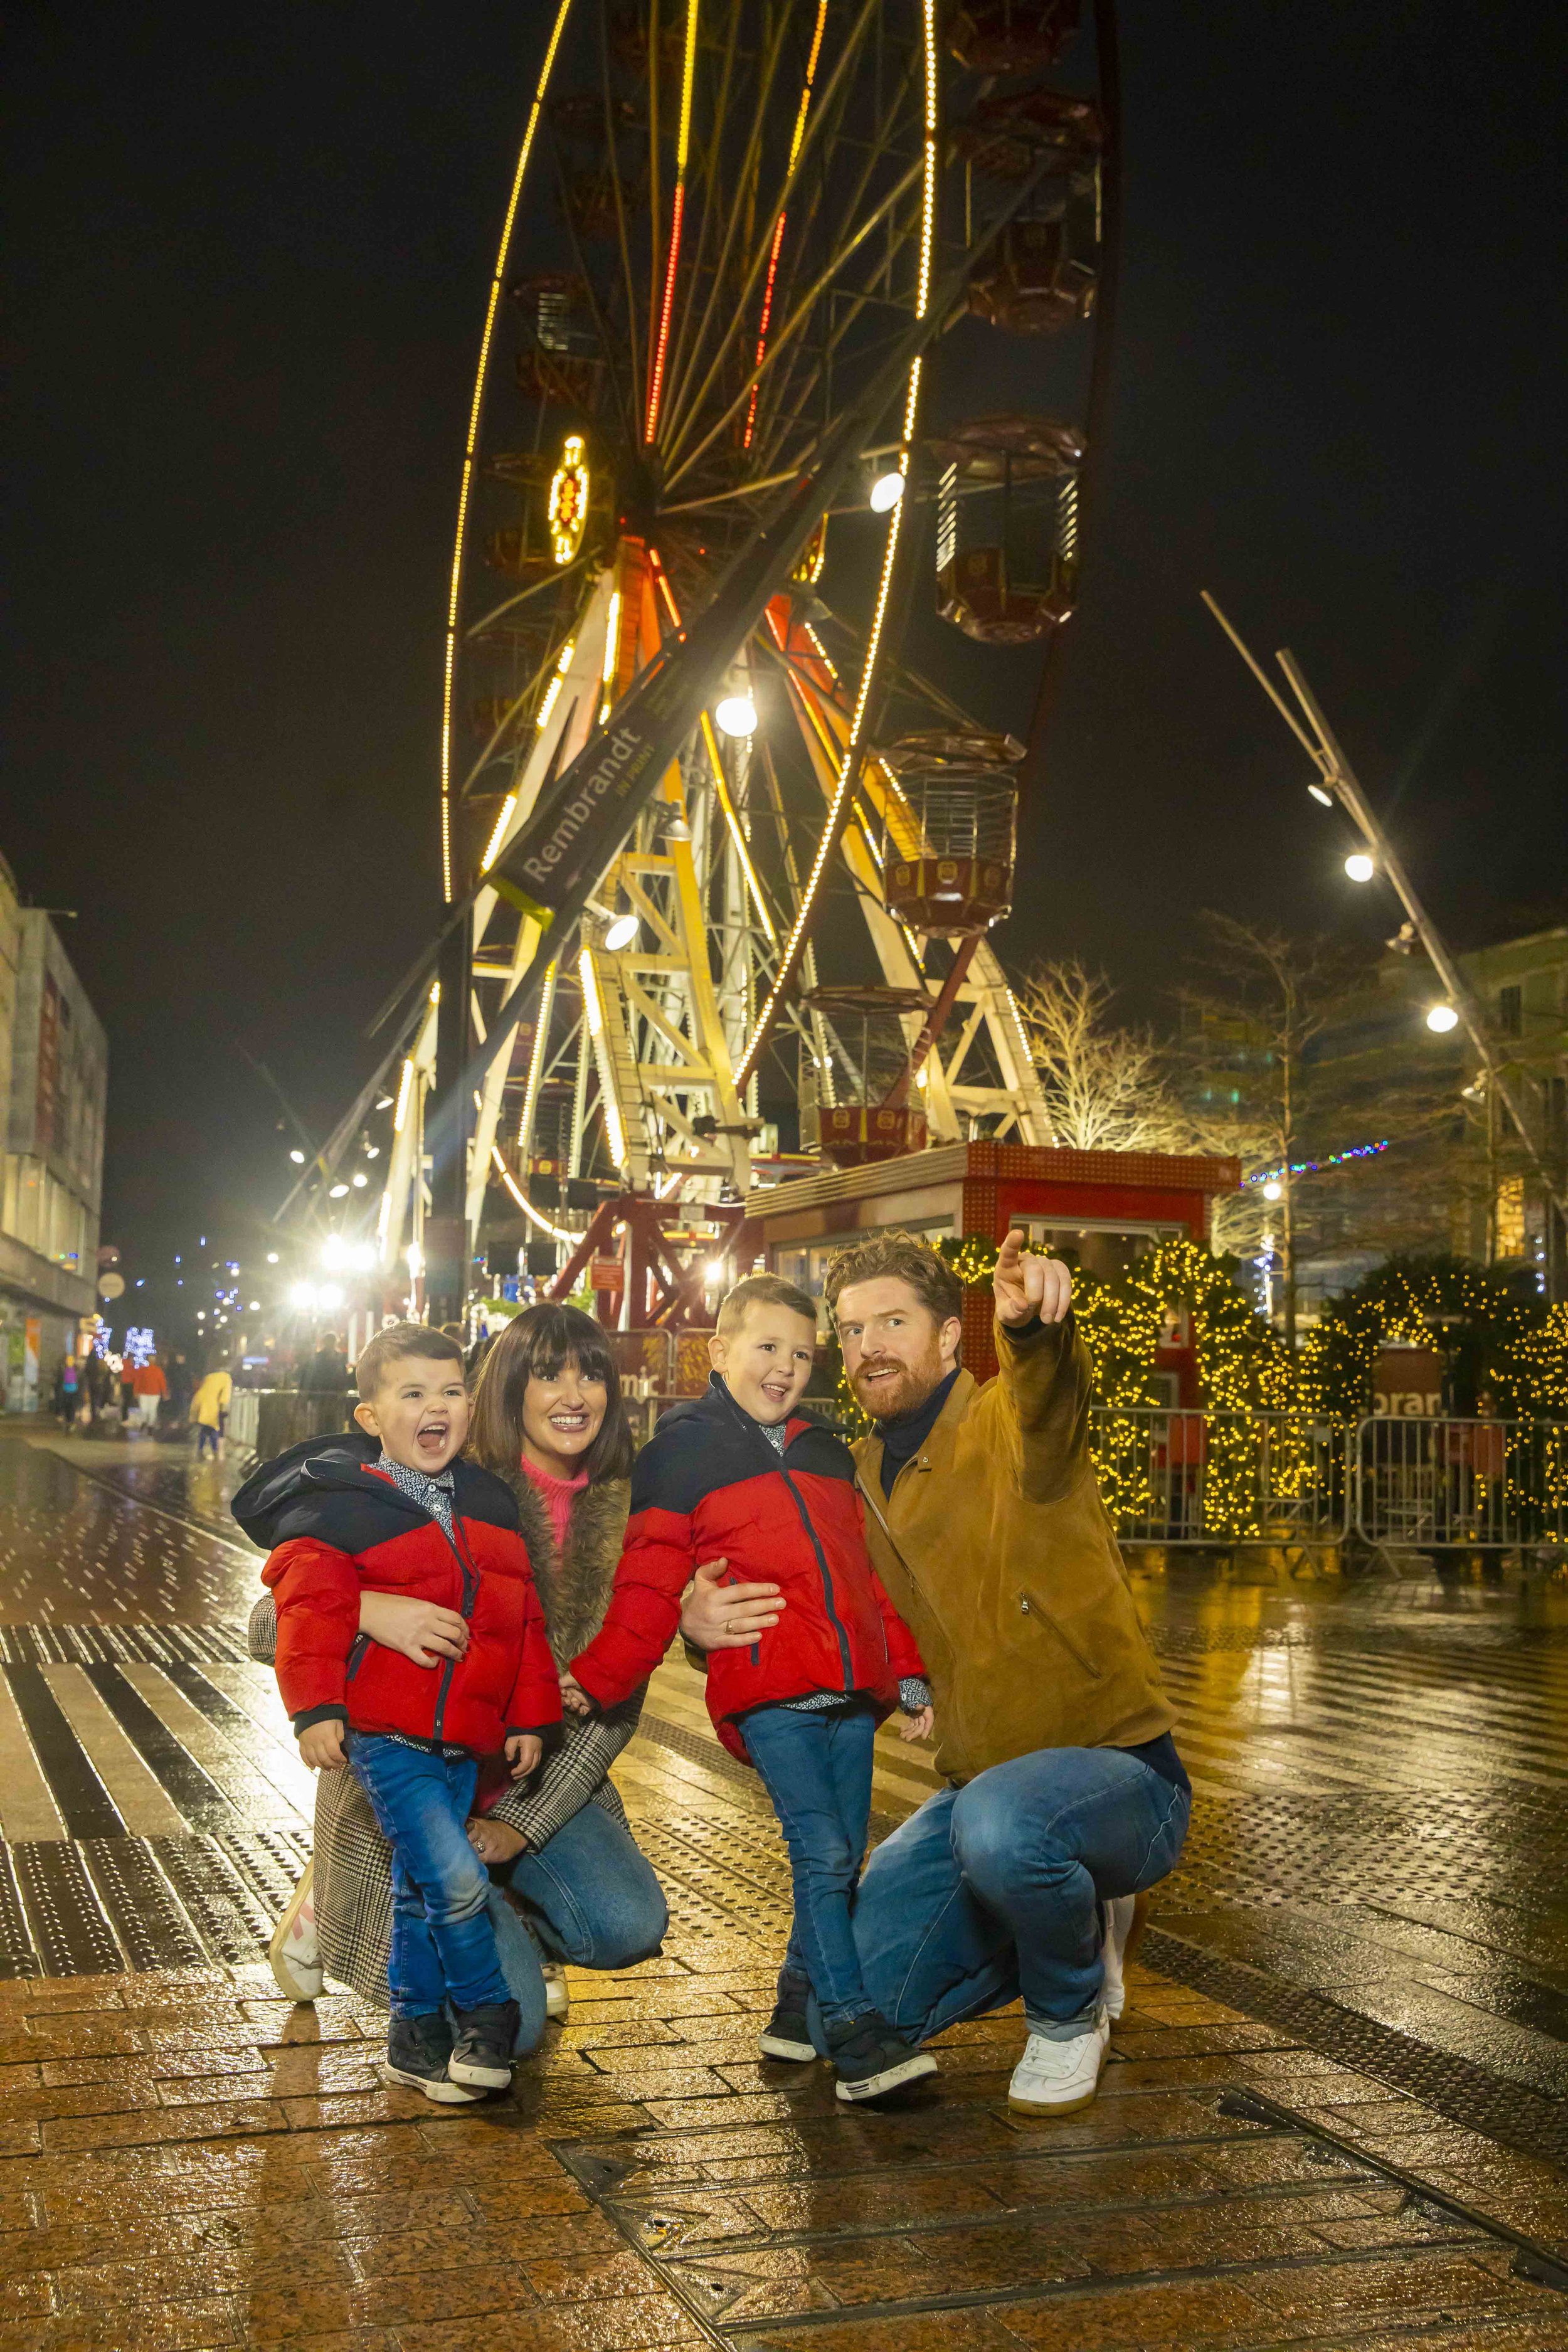 christmas market trips from cork